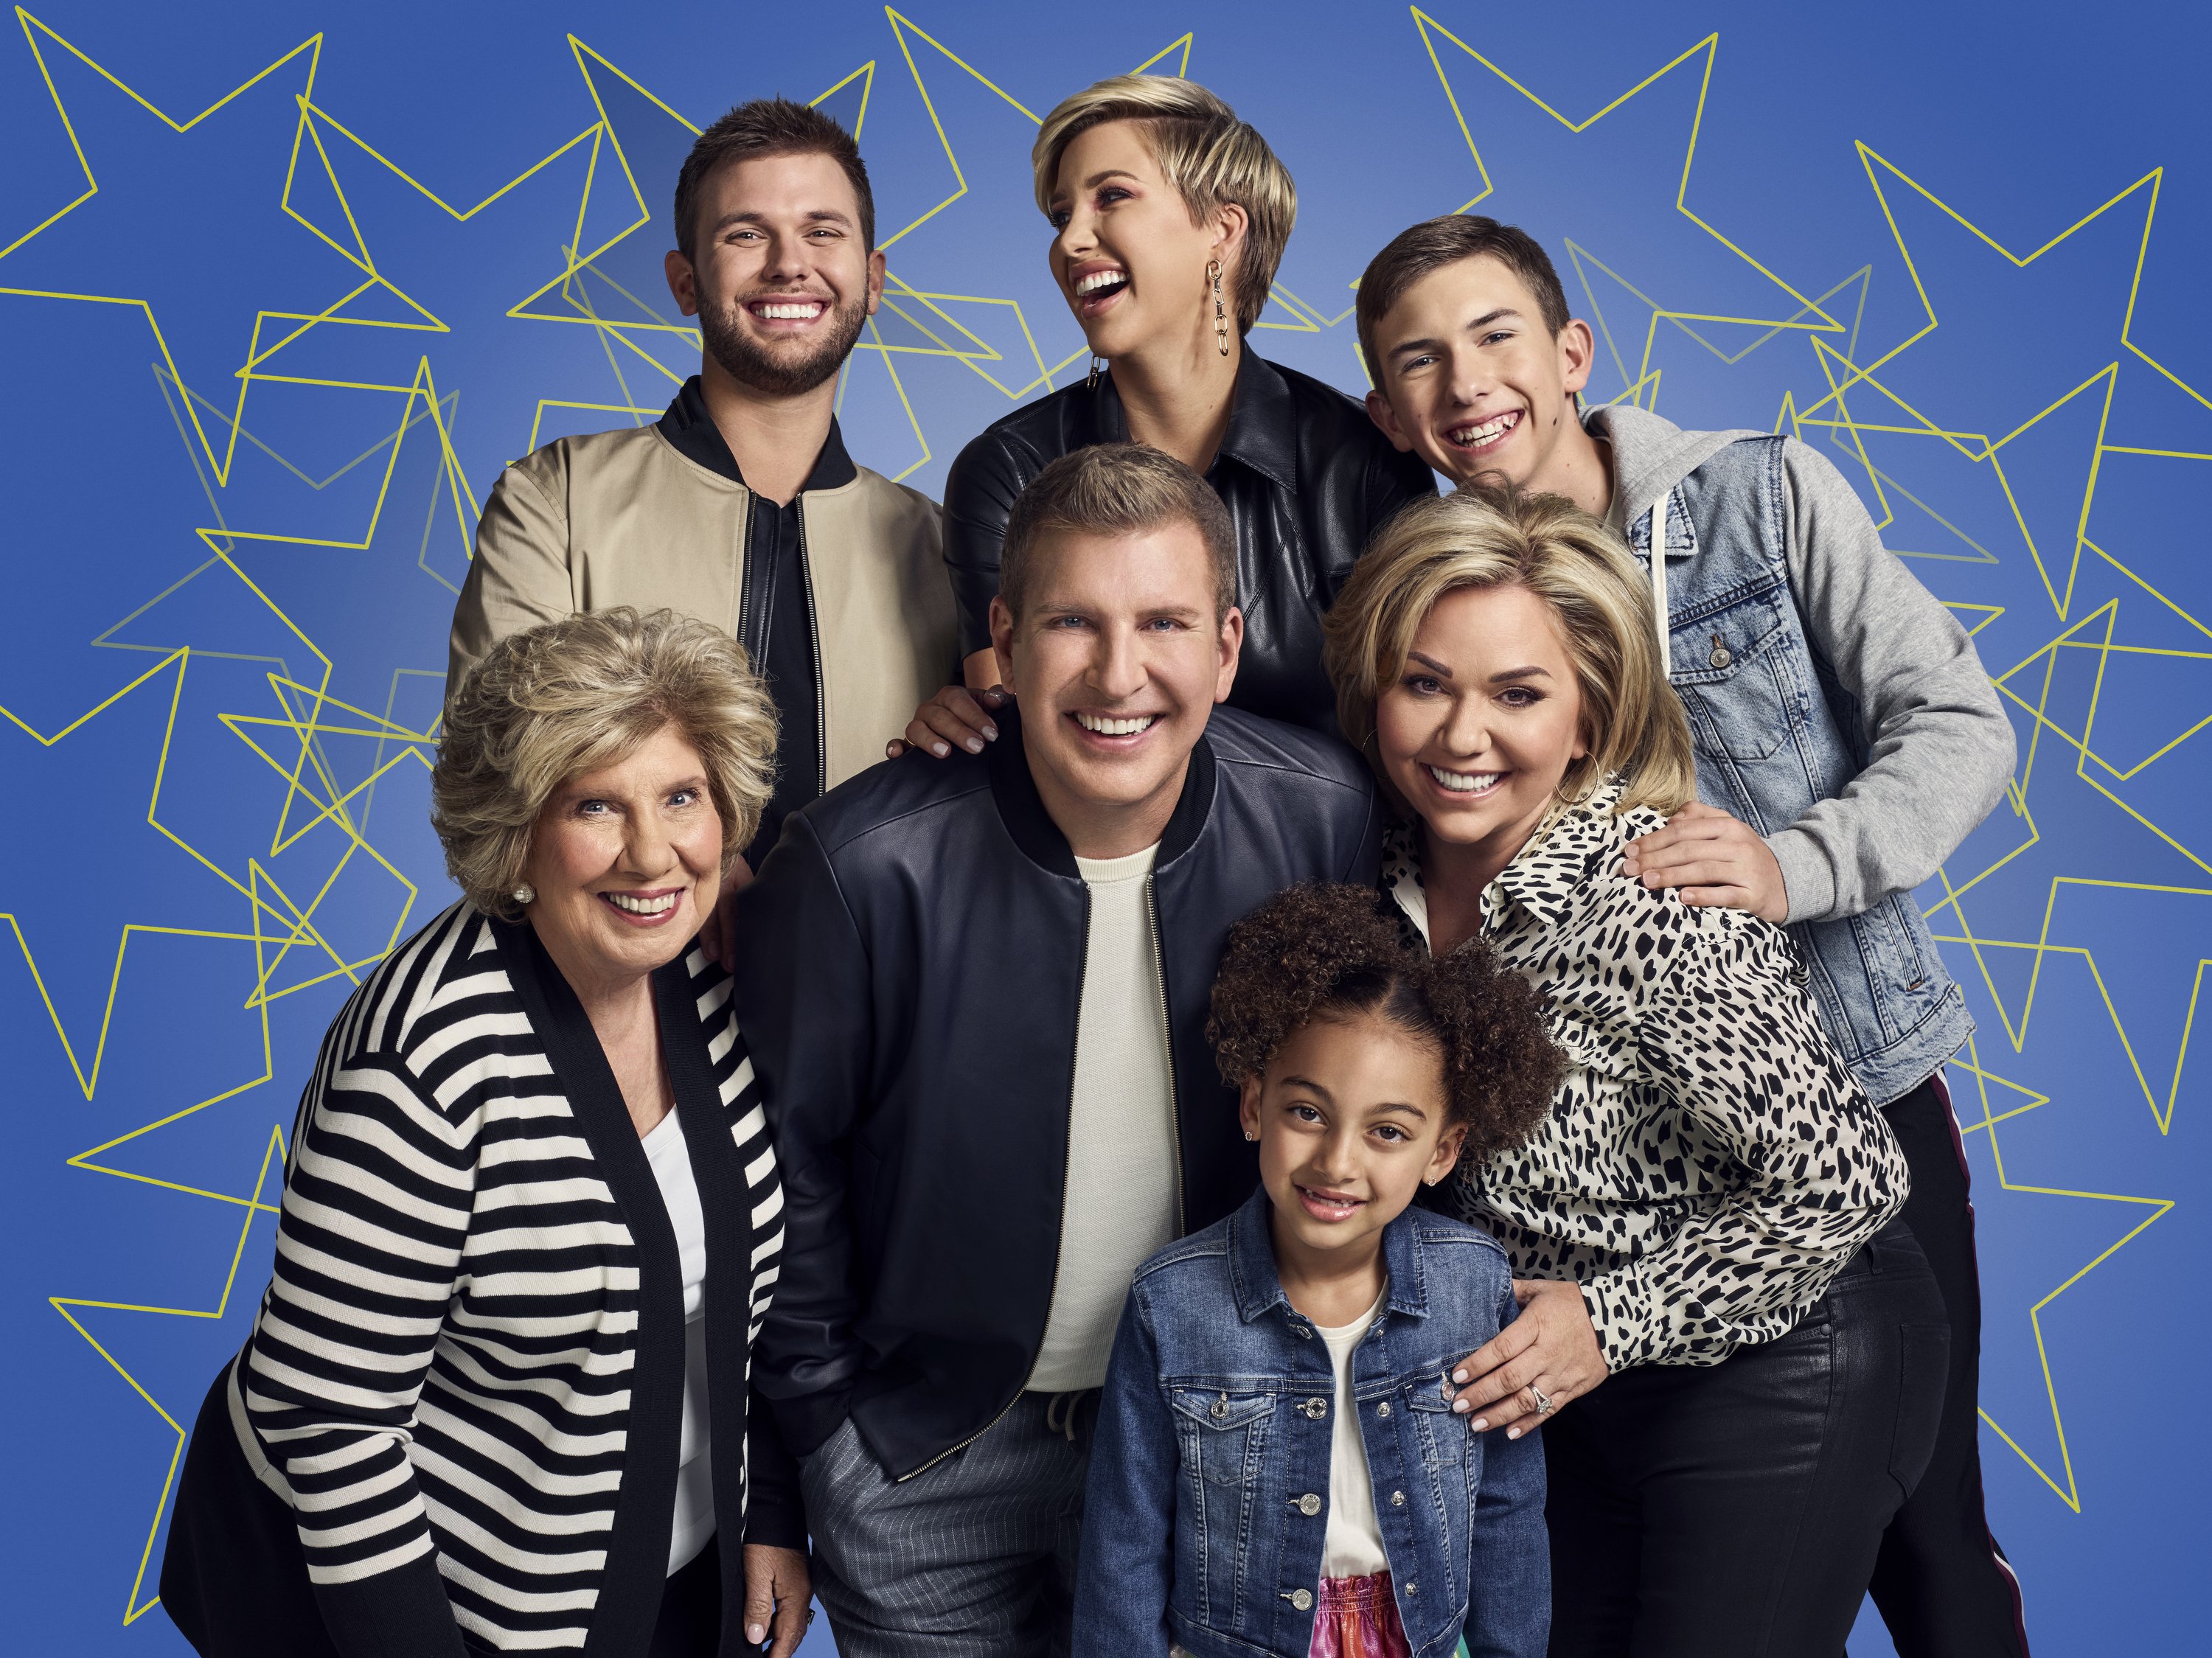 Pictured: (L-R) Faye Chrisley, Chase Chrisley, Todd Chrisley, Savannah Chrisley, Chloe Chrisley, Julie Chrisley, Grayson Chrisley during Season 8 of "Chrisley Knows Best | Getty Images